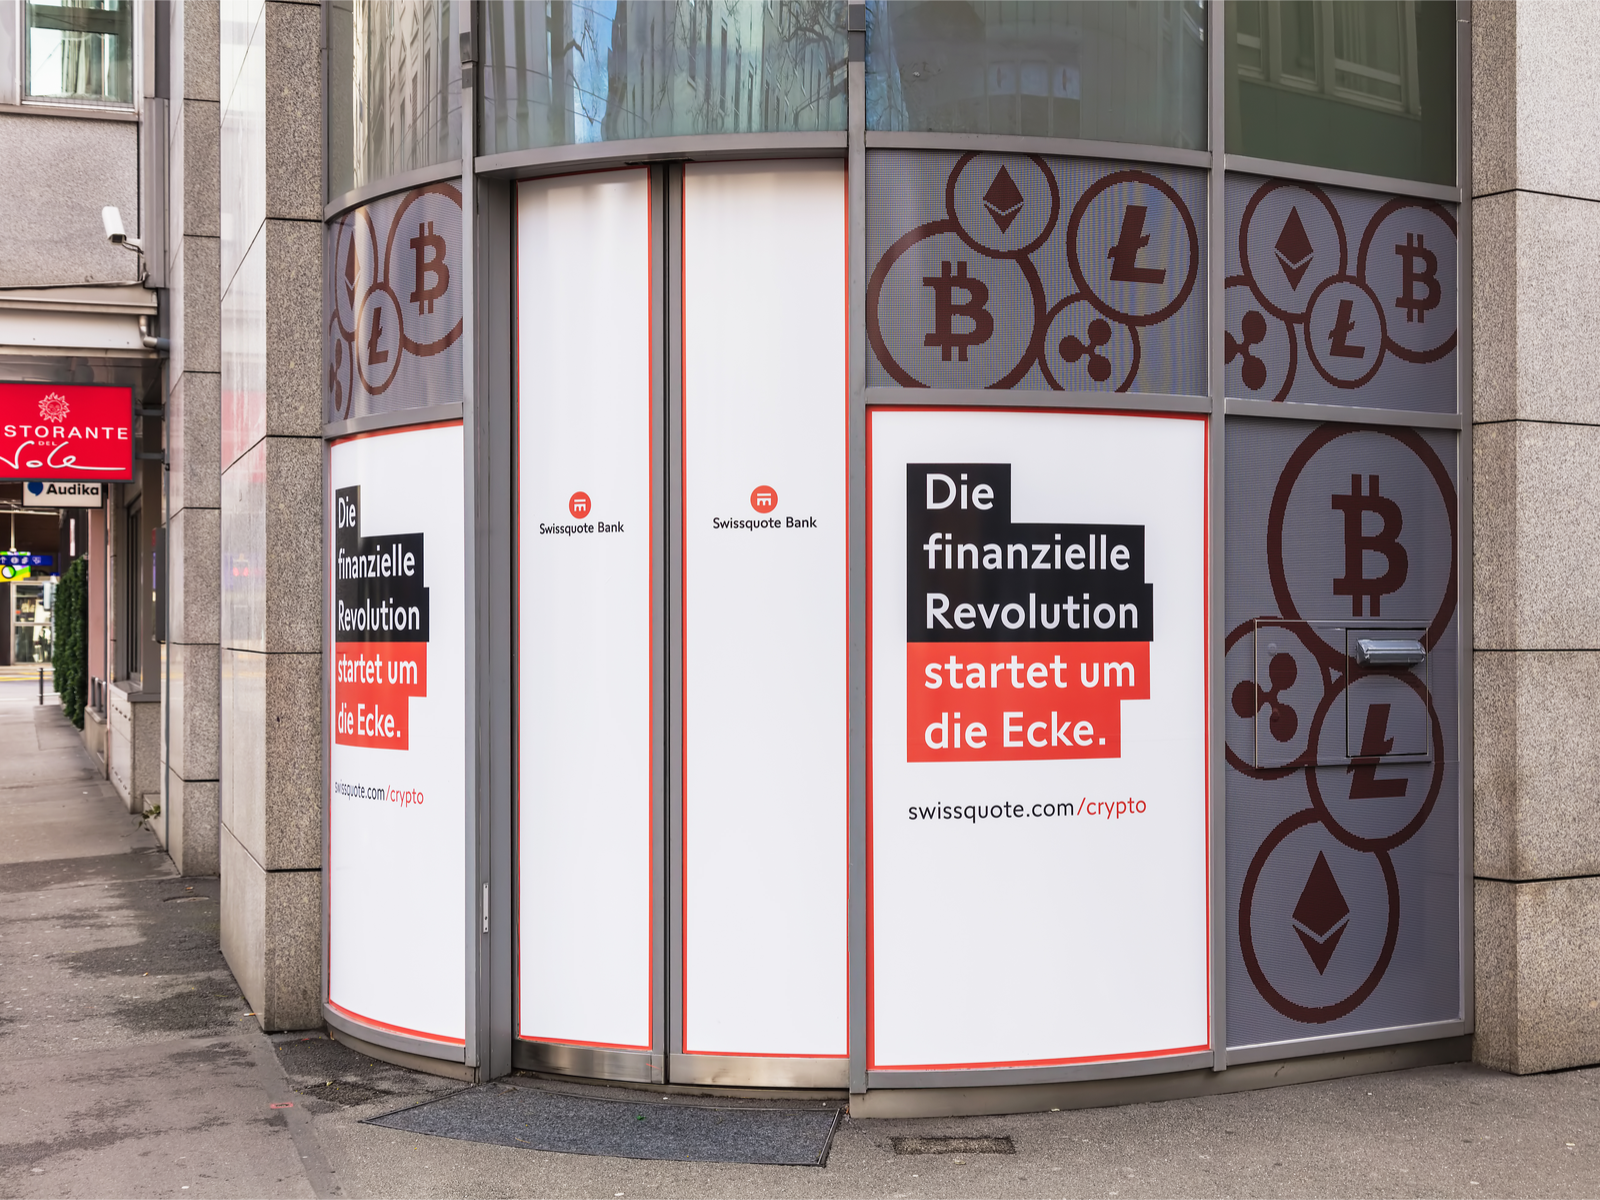 Online Bank Swissquote to Add Crypto Custodial Services